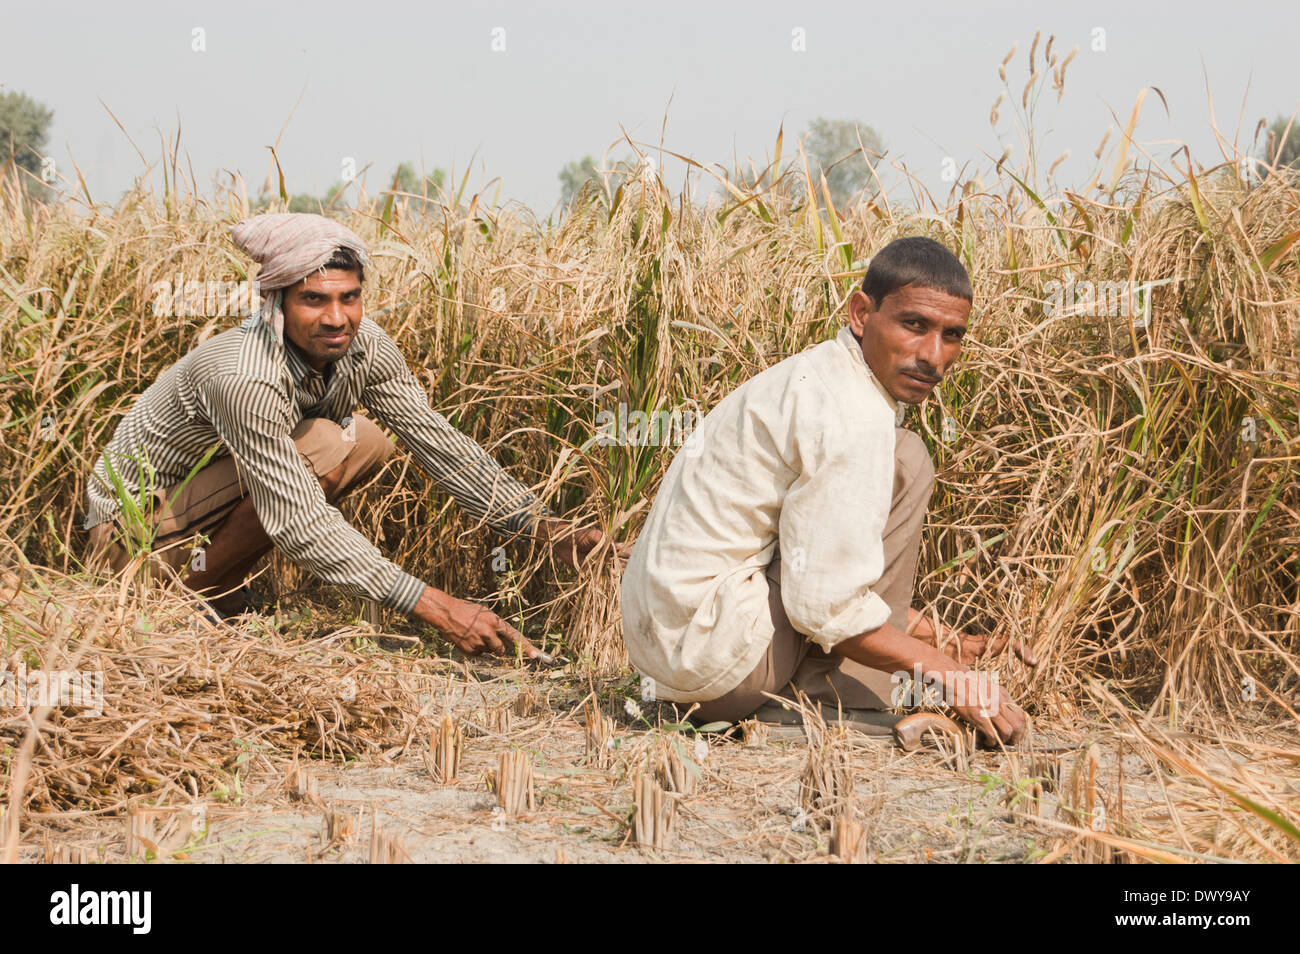 Indian Farmer working in Paddy Field Stock Photo